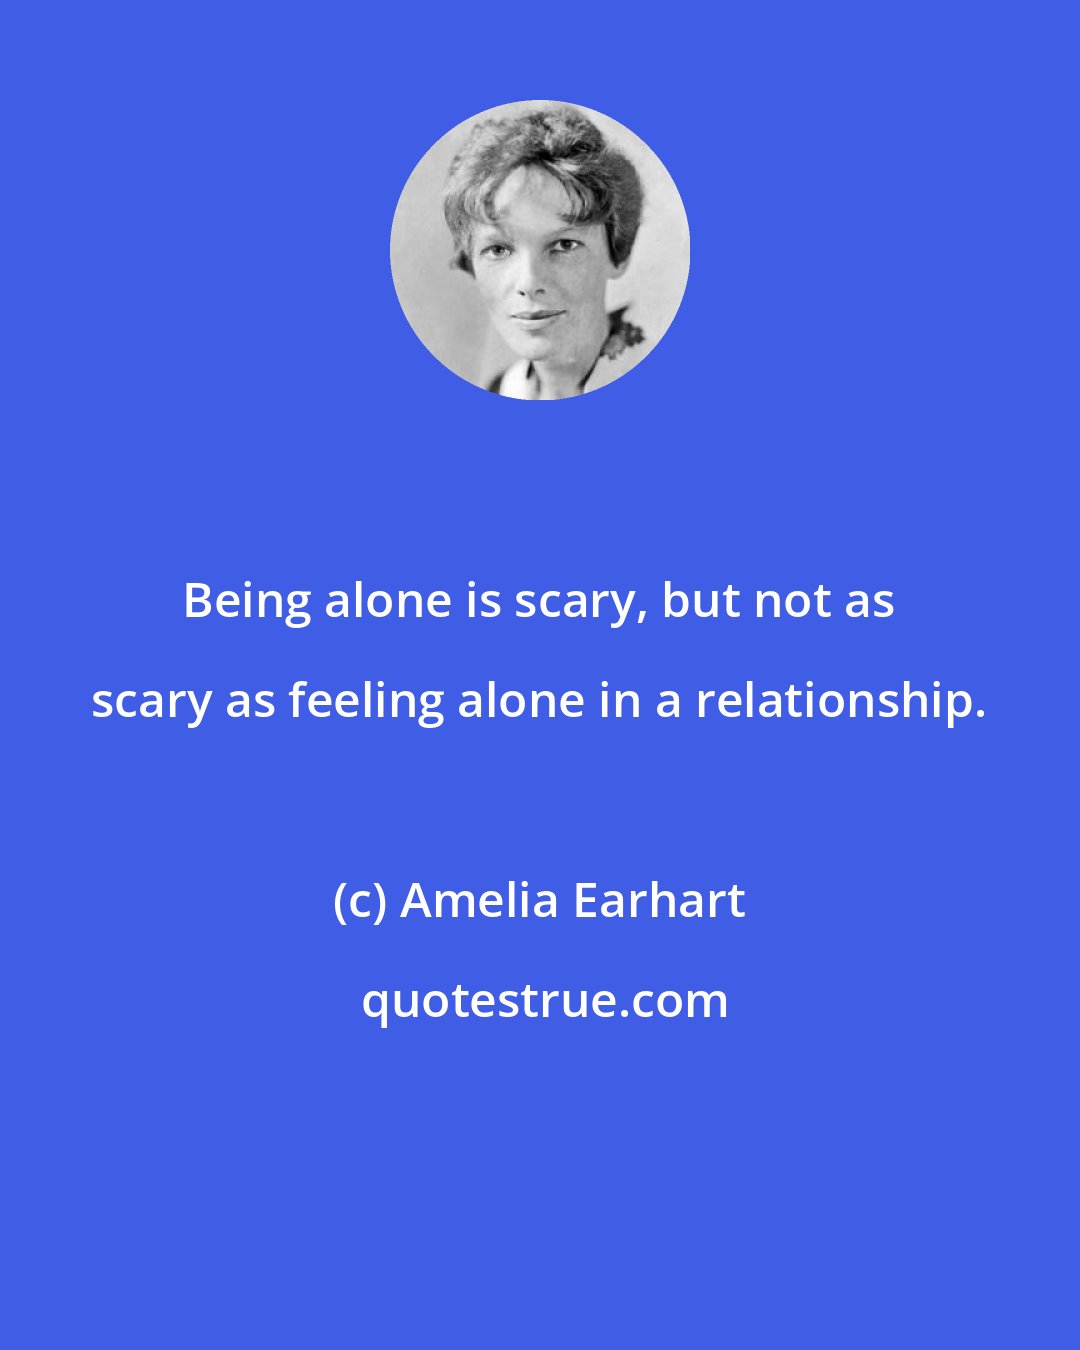 Amelia Earhart: Being alone is scary, but not as scary as feeling alone in a relationship.